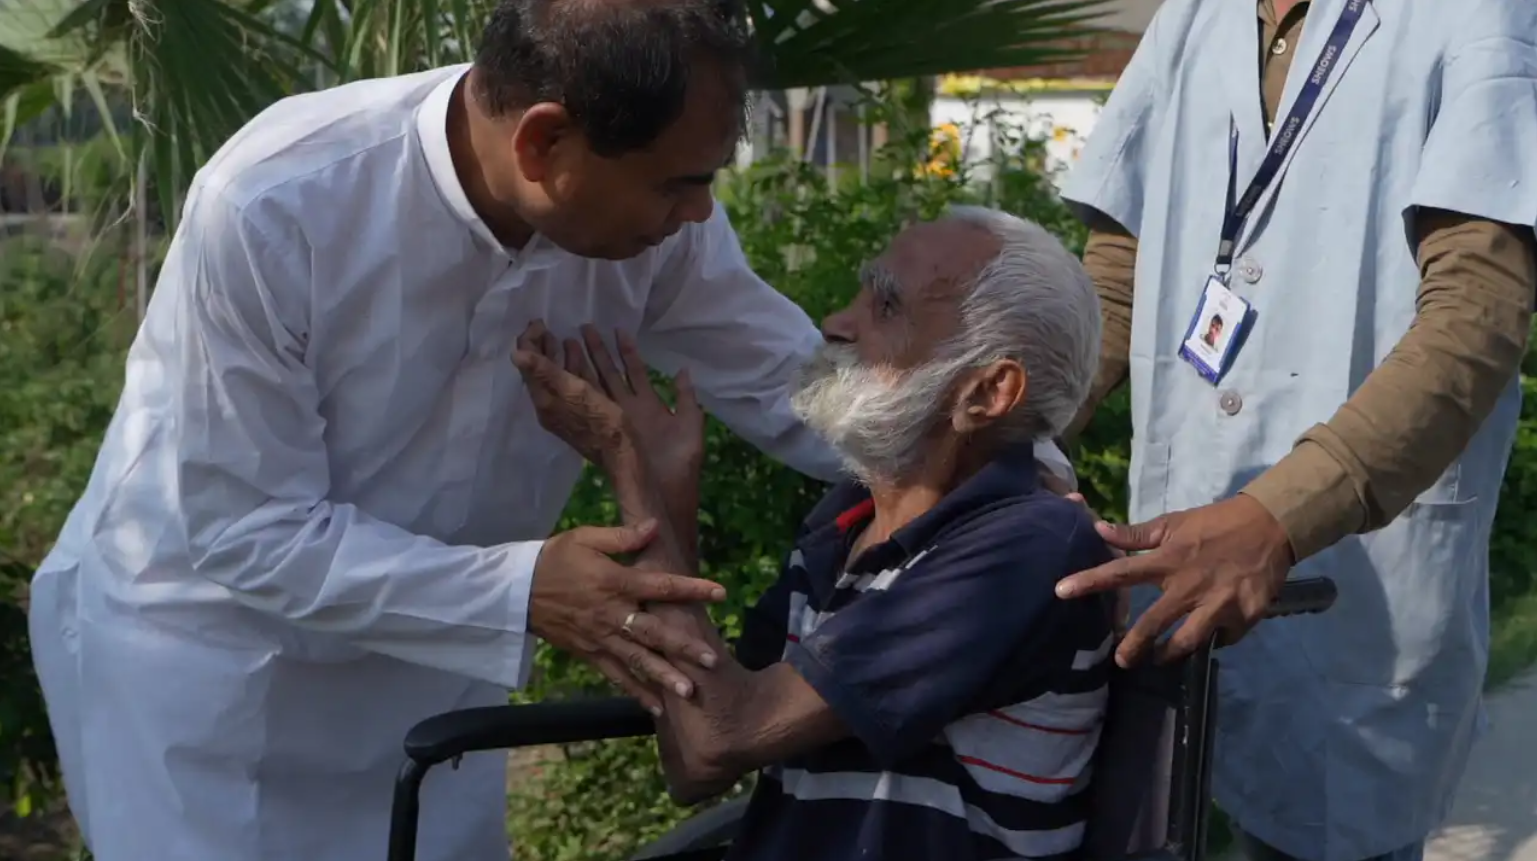 Lend a hand to this NGO for senior citizens who takes in and comforts the abused